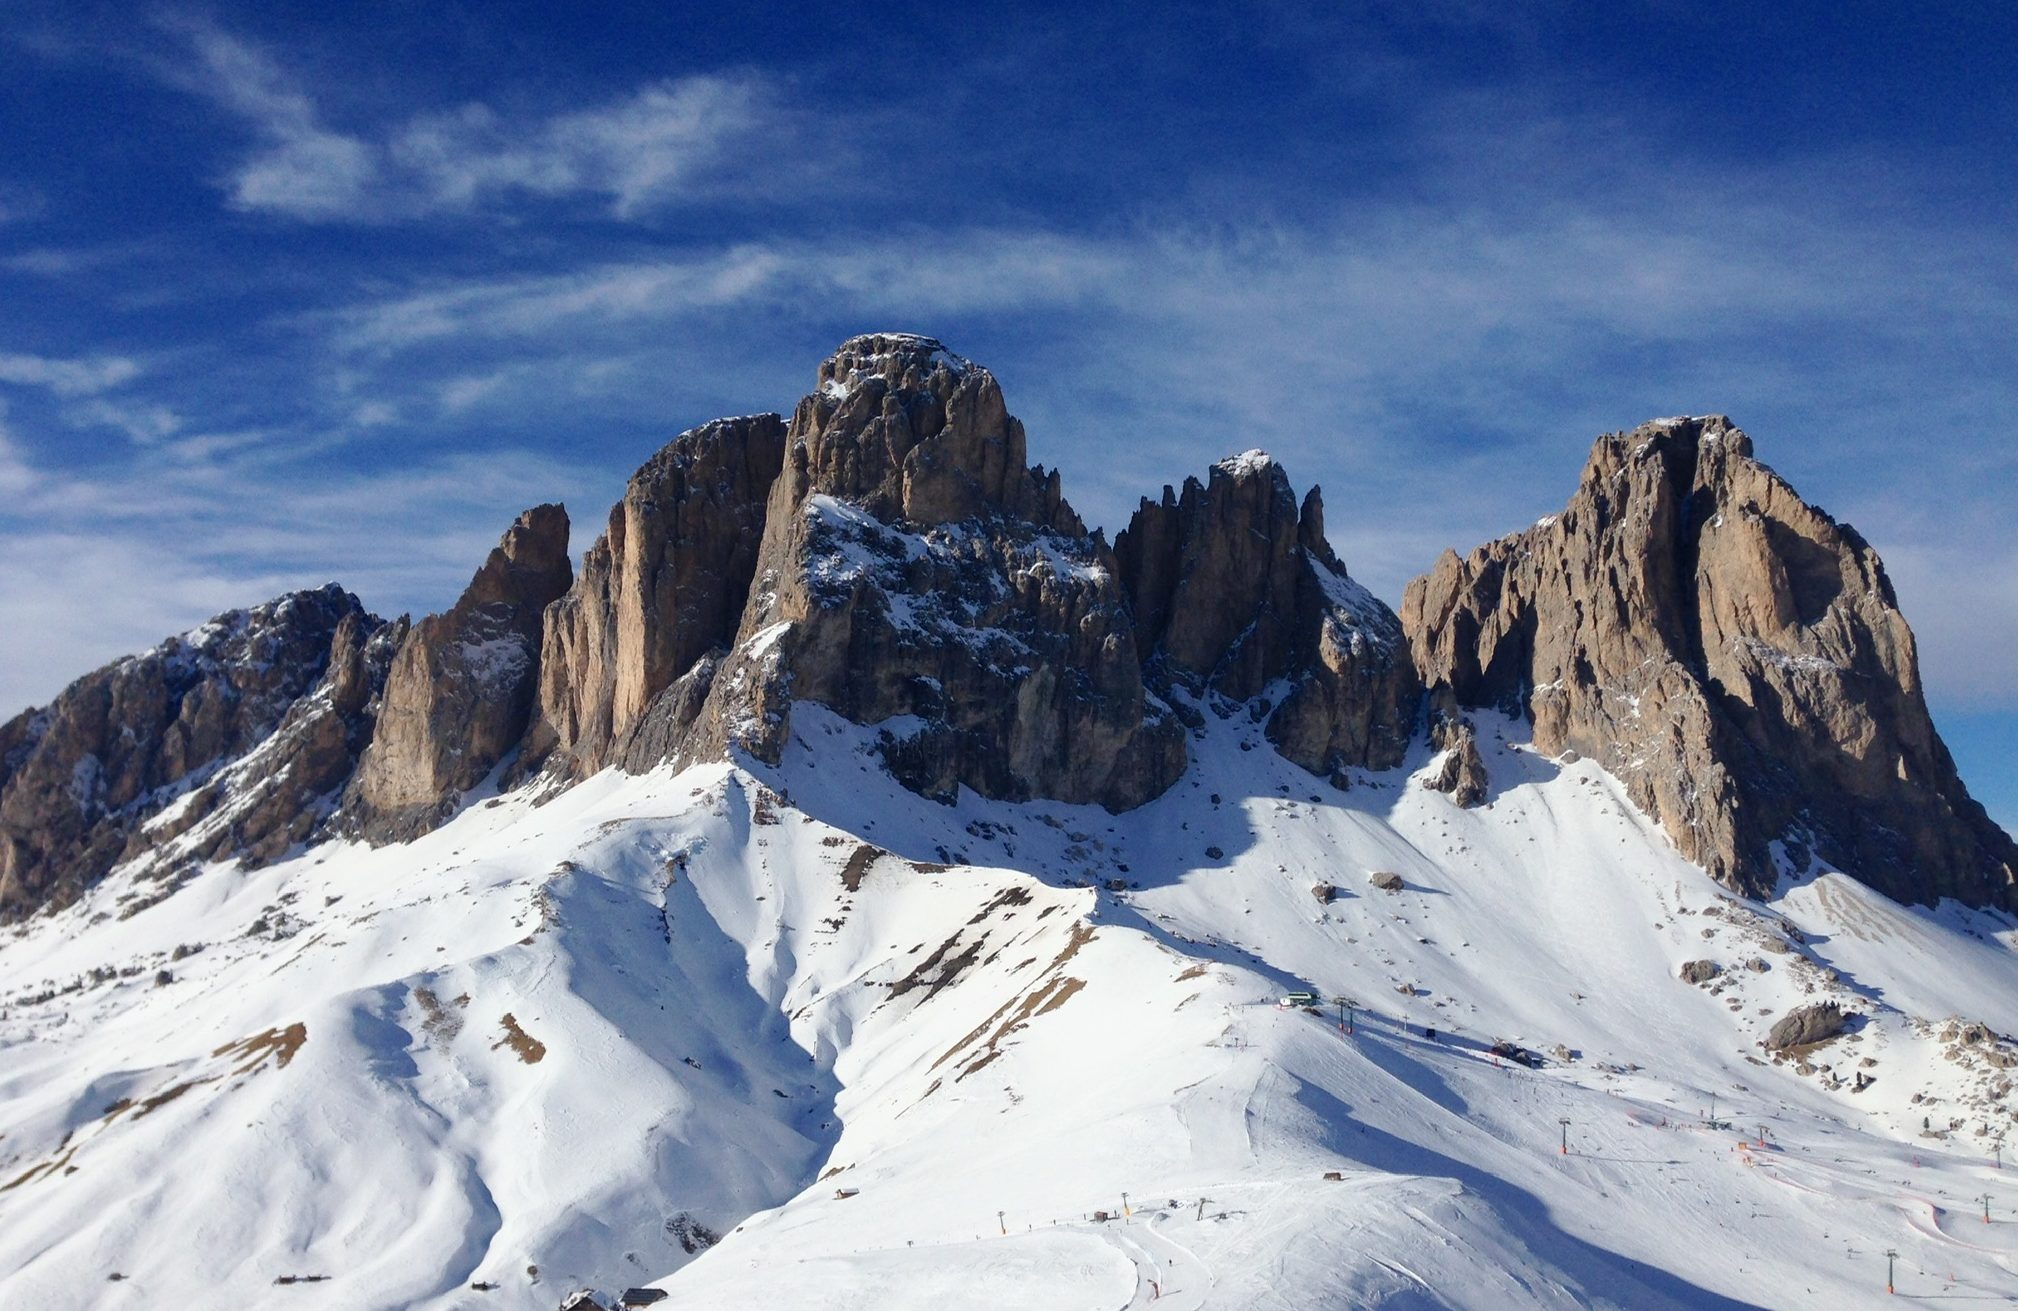 The spectacular jagged peaks of the Dolomites tower over so many fantastic ski runs